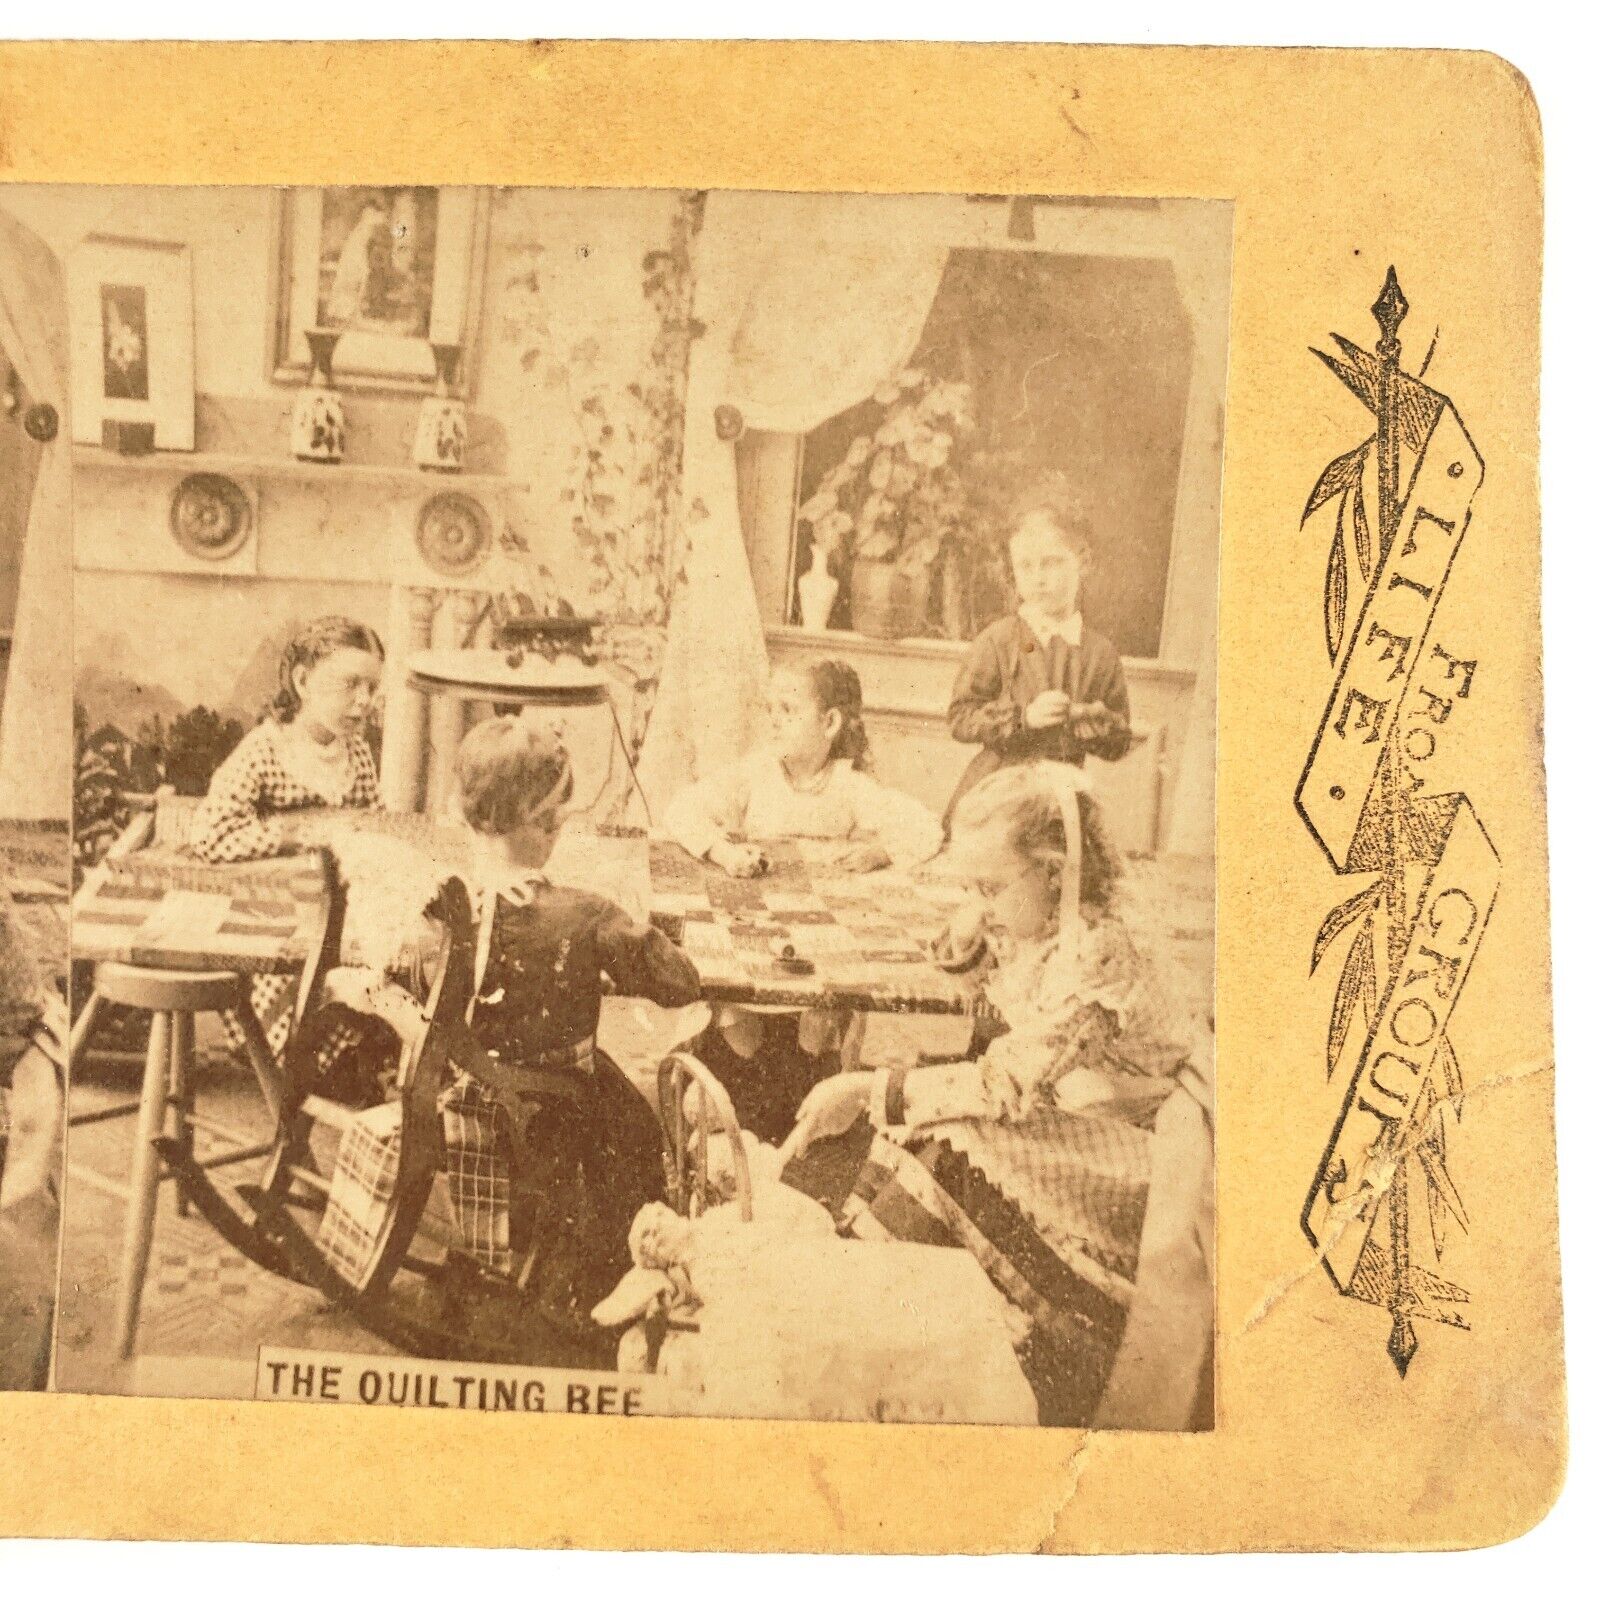 Quilting Bee Girls Sewing Stereoview c1890 Children At Play Party Photo A1943